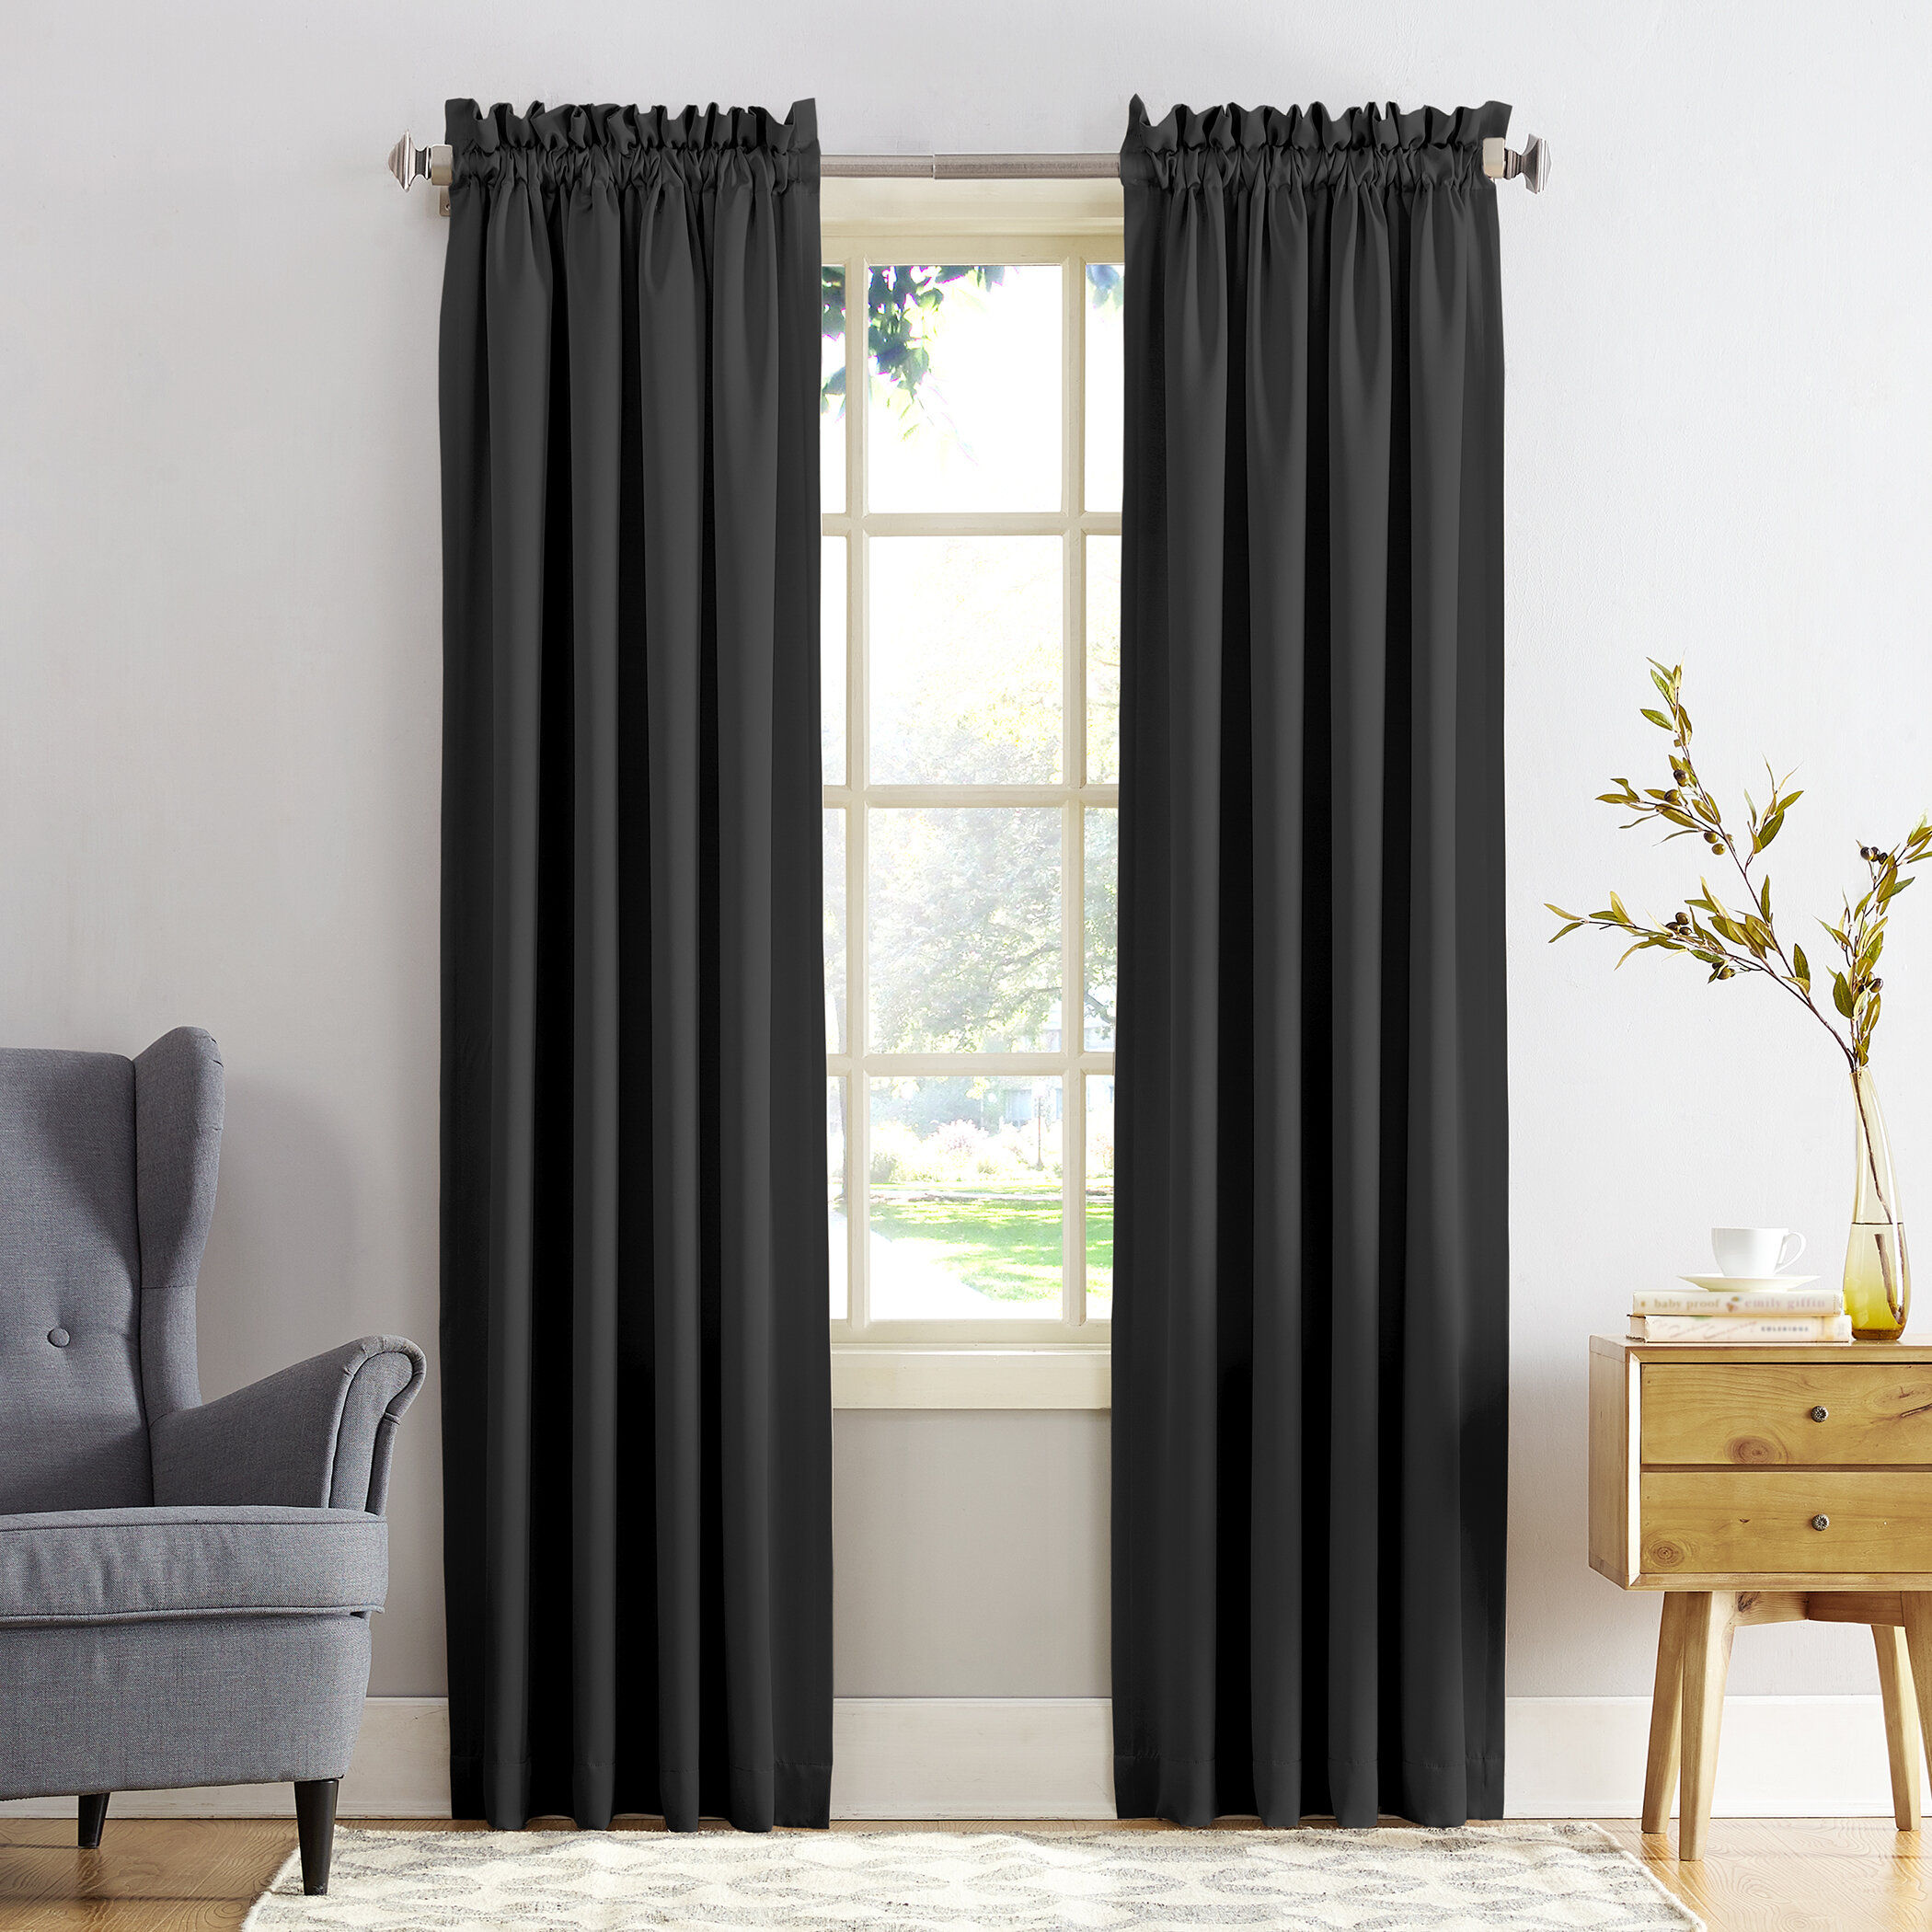 100% Blackout 2 PC Rod Pocket Faux Linen Thermal Bedroom Window Curtain Drapes 